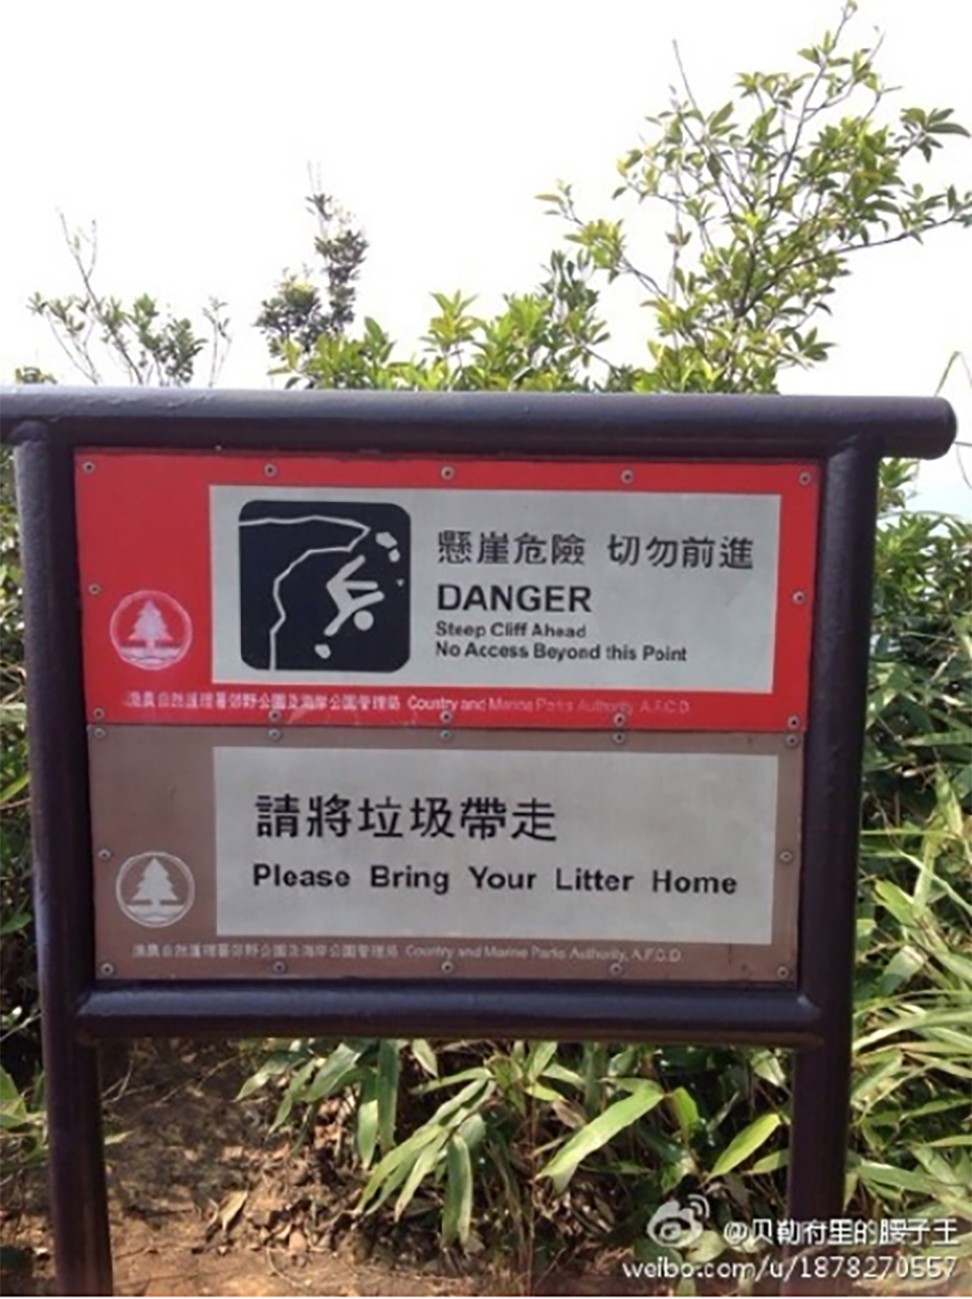 A sign warns of the dangers of going off track on Tiu Shau Ngam. Photo: Weibo